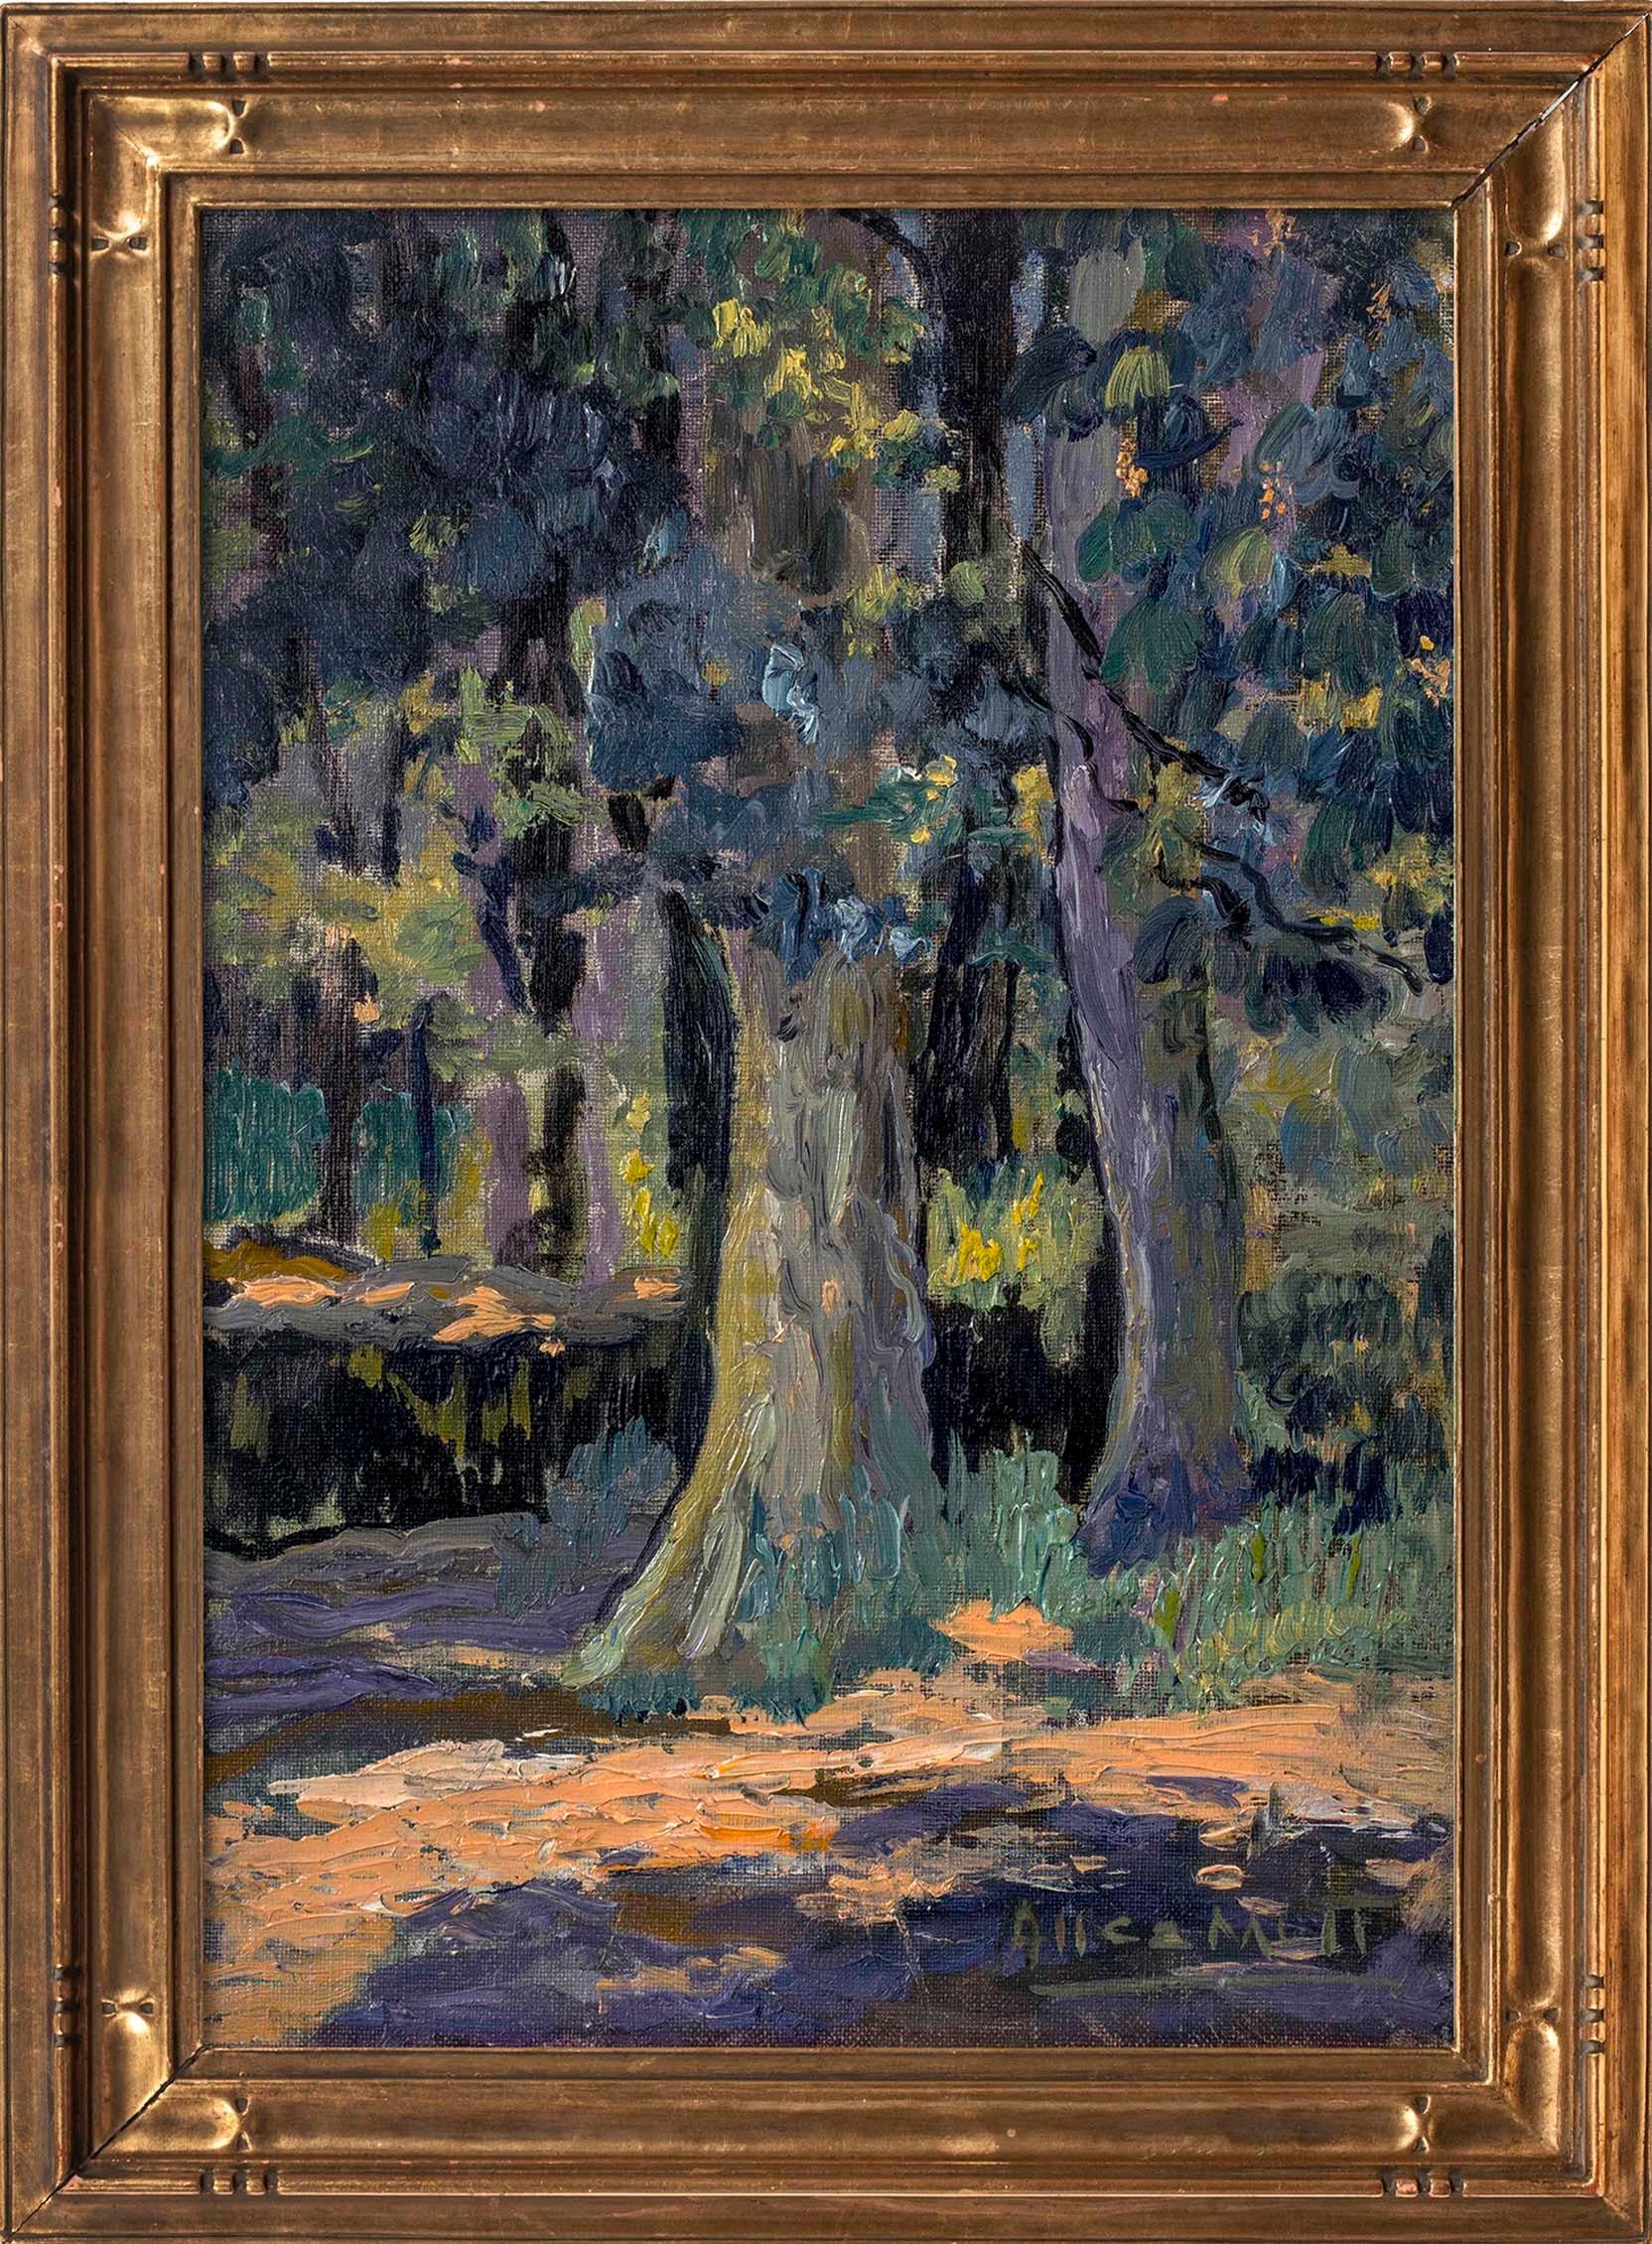 "Cypress Trees," by American artist Alice Lolita Muth is oil on canvas and measures 13¾ x 9½ inches. The work is signed by the artist at the lower right. It is framed and ready to hang.

Alice Lolita Muth was born Alice Helen Muth in Cincinnati,